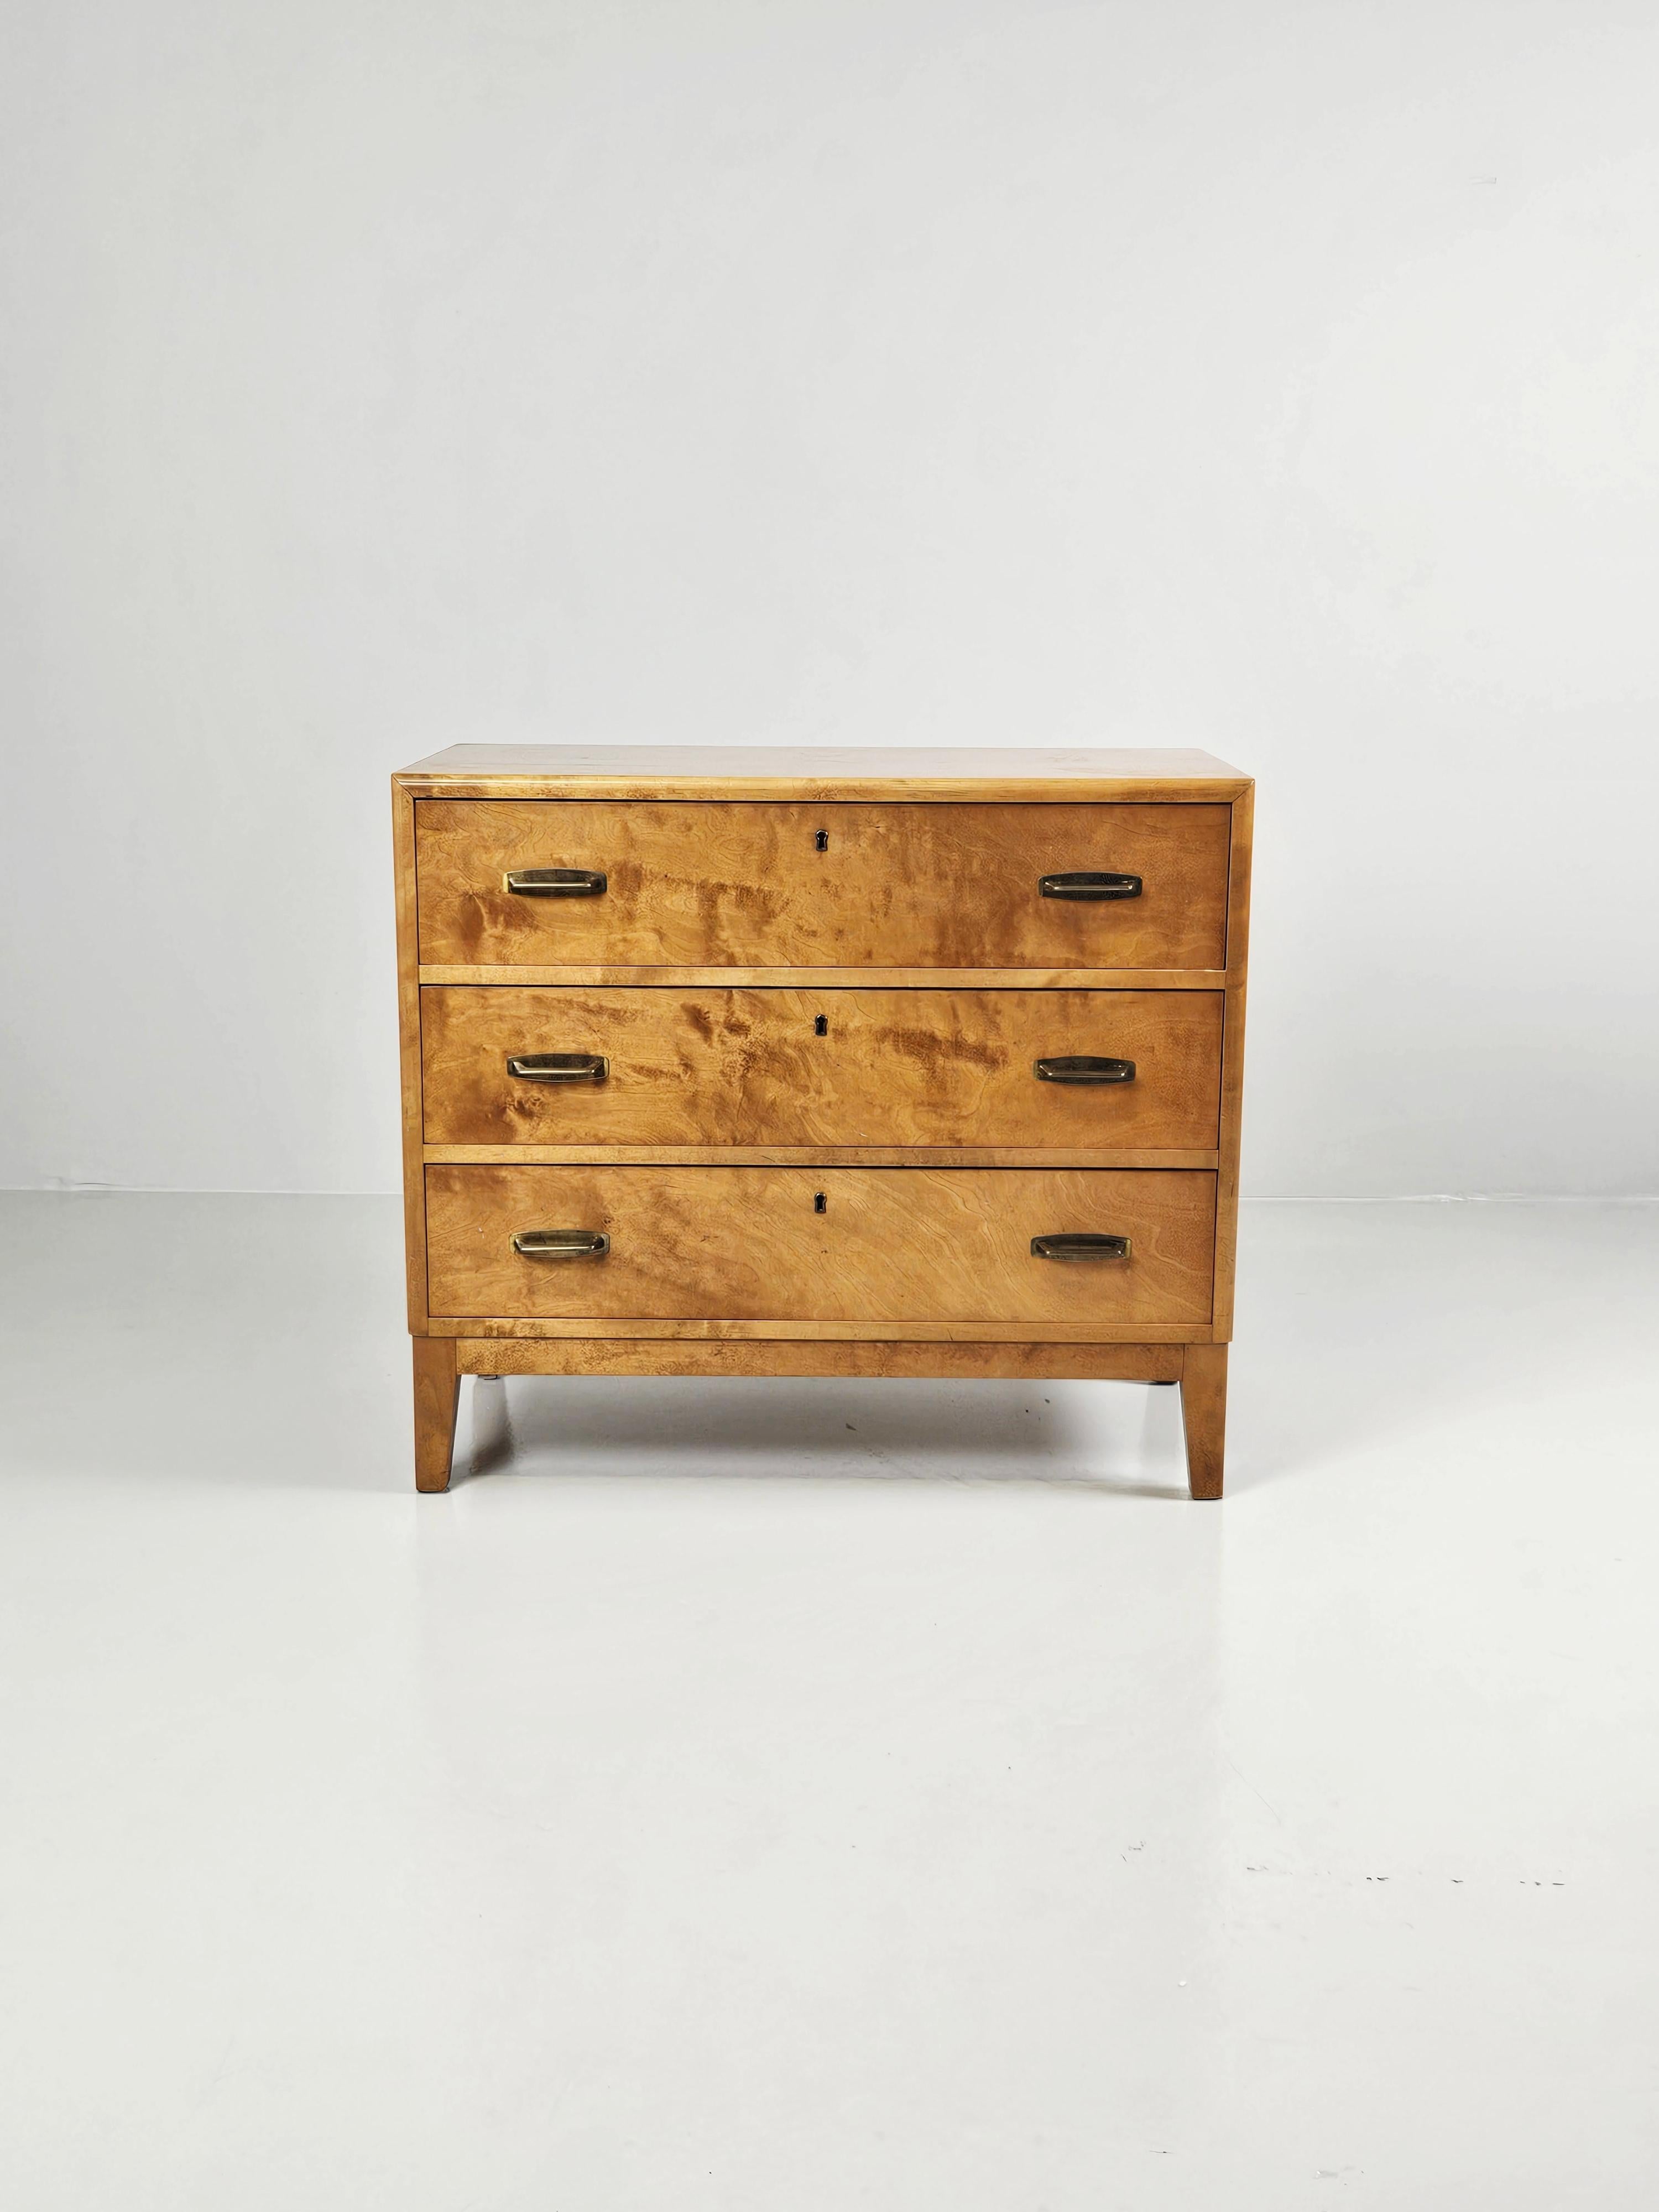 Great functionalistic chest of drawers produced in Sweden during the 1950s. 

Made in birch with brass handles. 